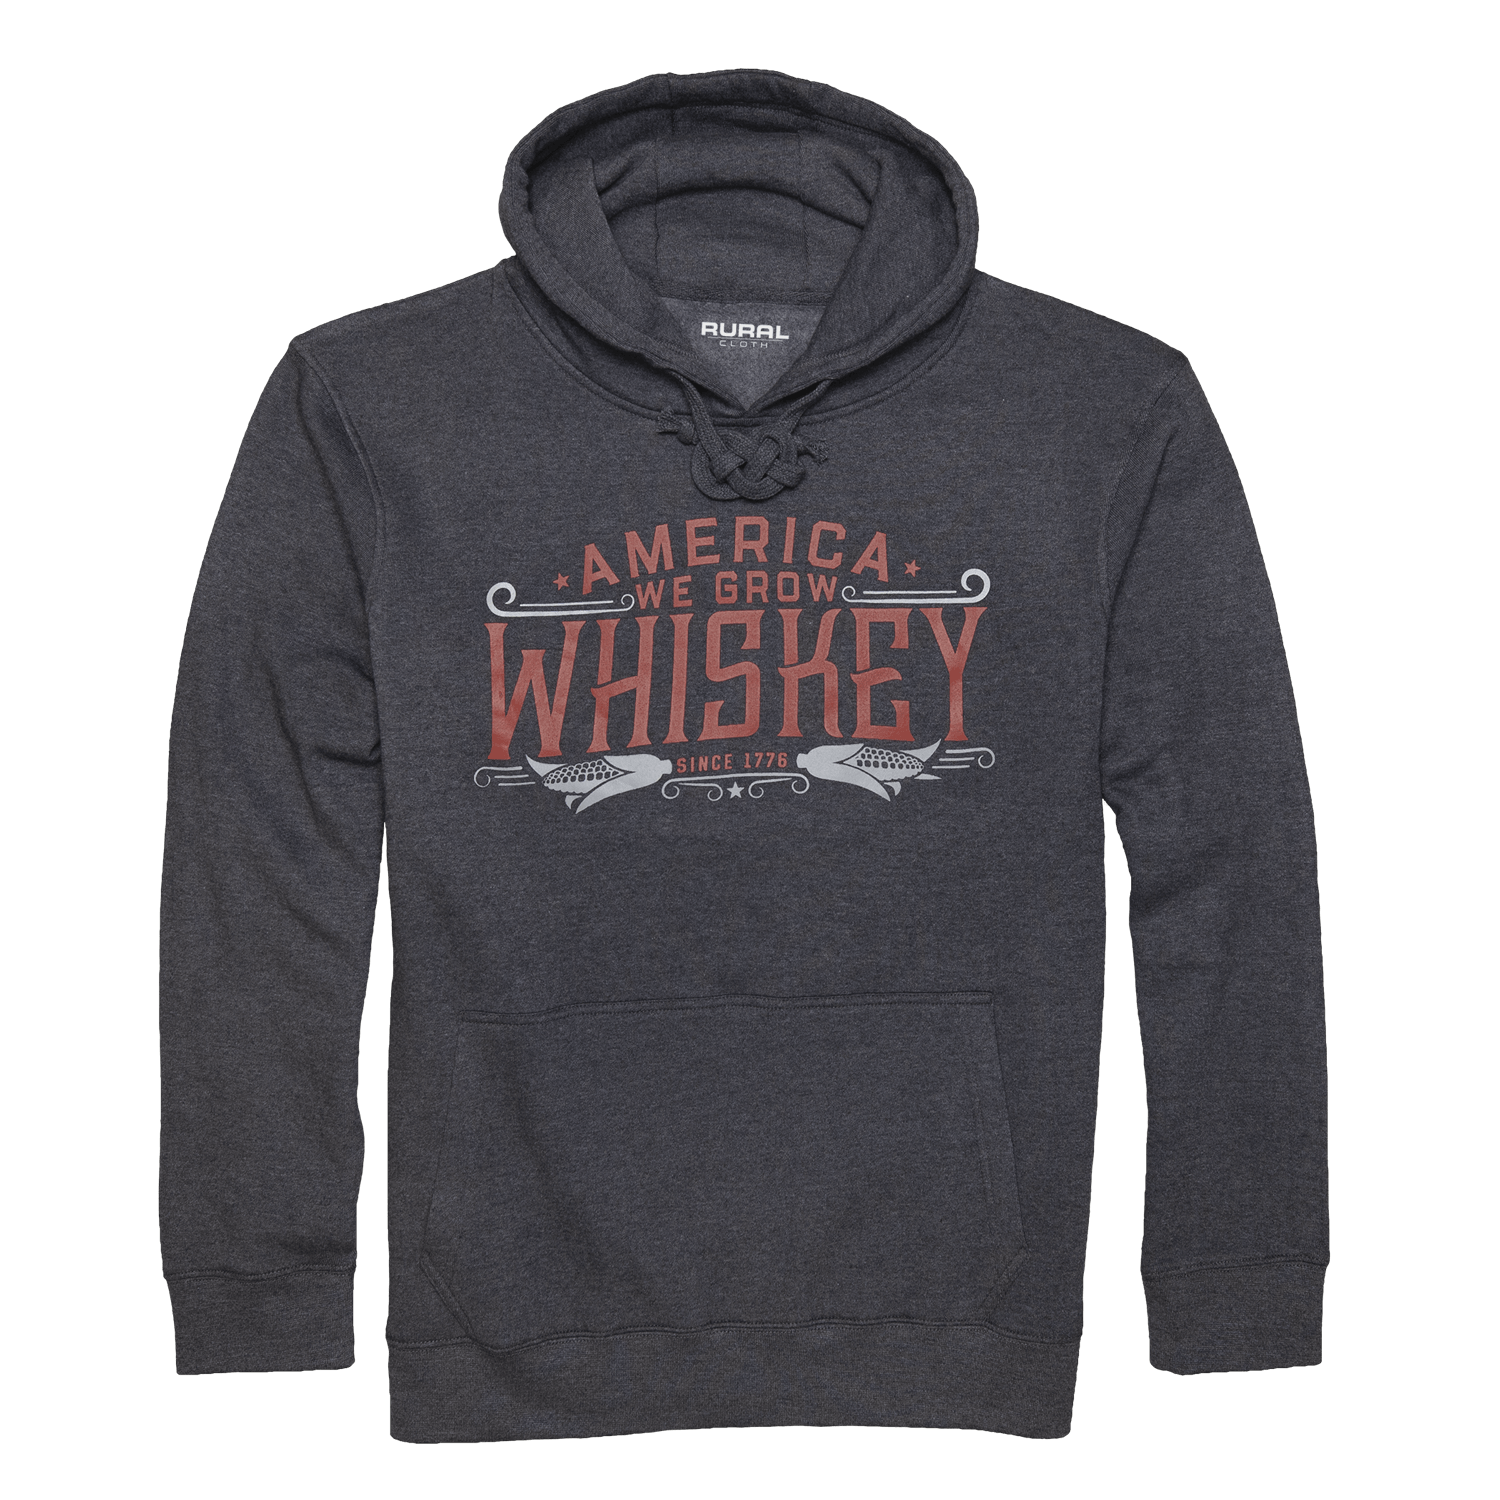 Rural Cloth Outerwear We Grow Whiskey Pullover-Charcoal Heather